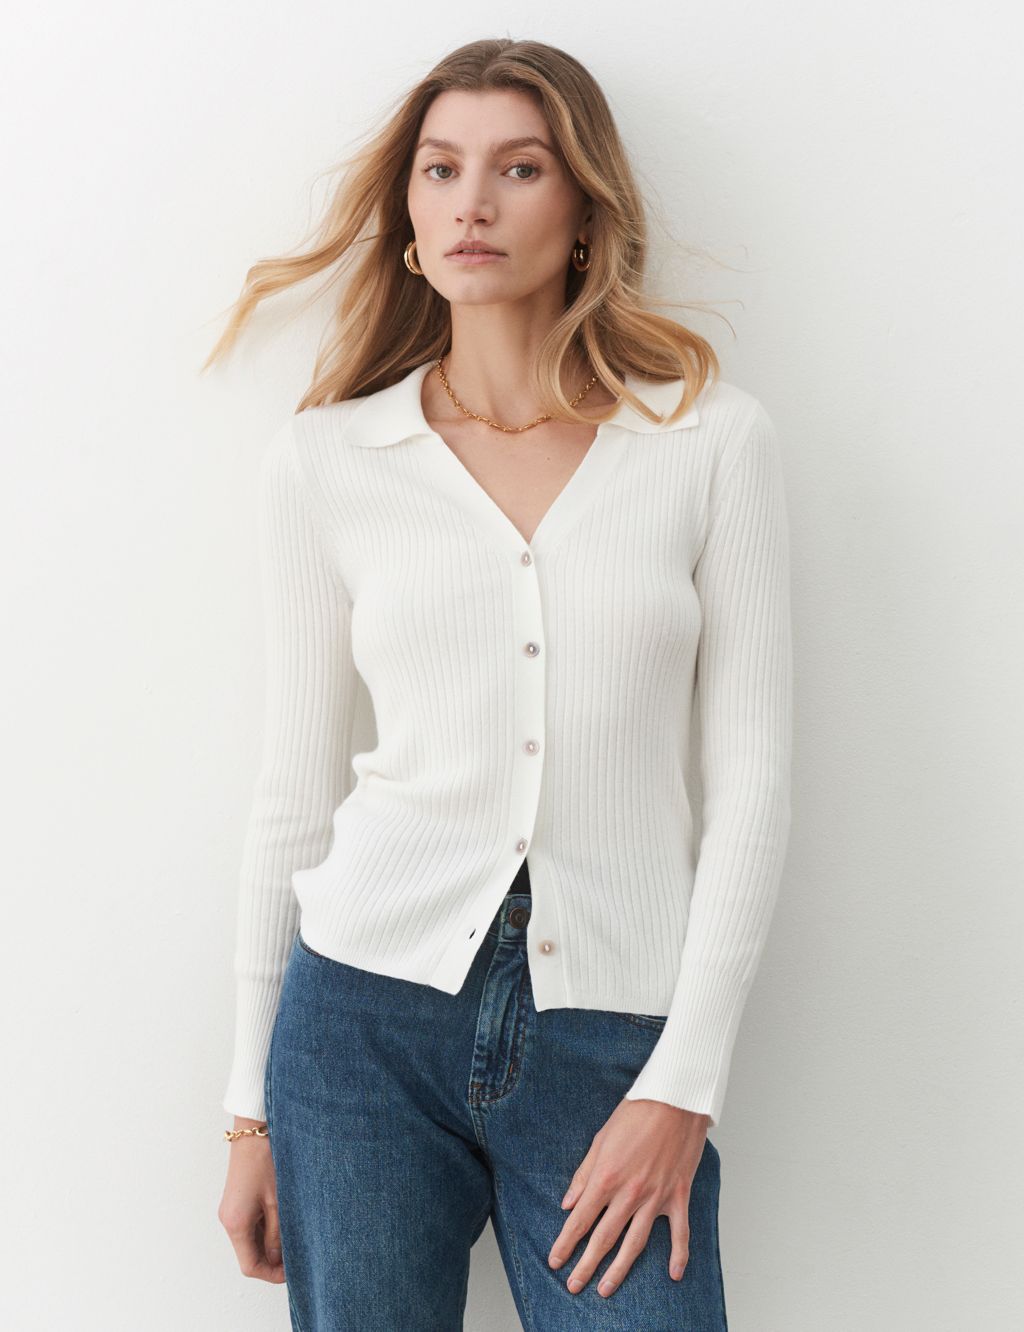 Ribbed Collared Button Front Cardigan image 1